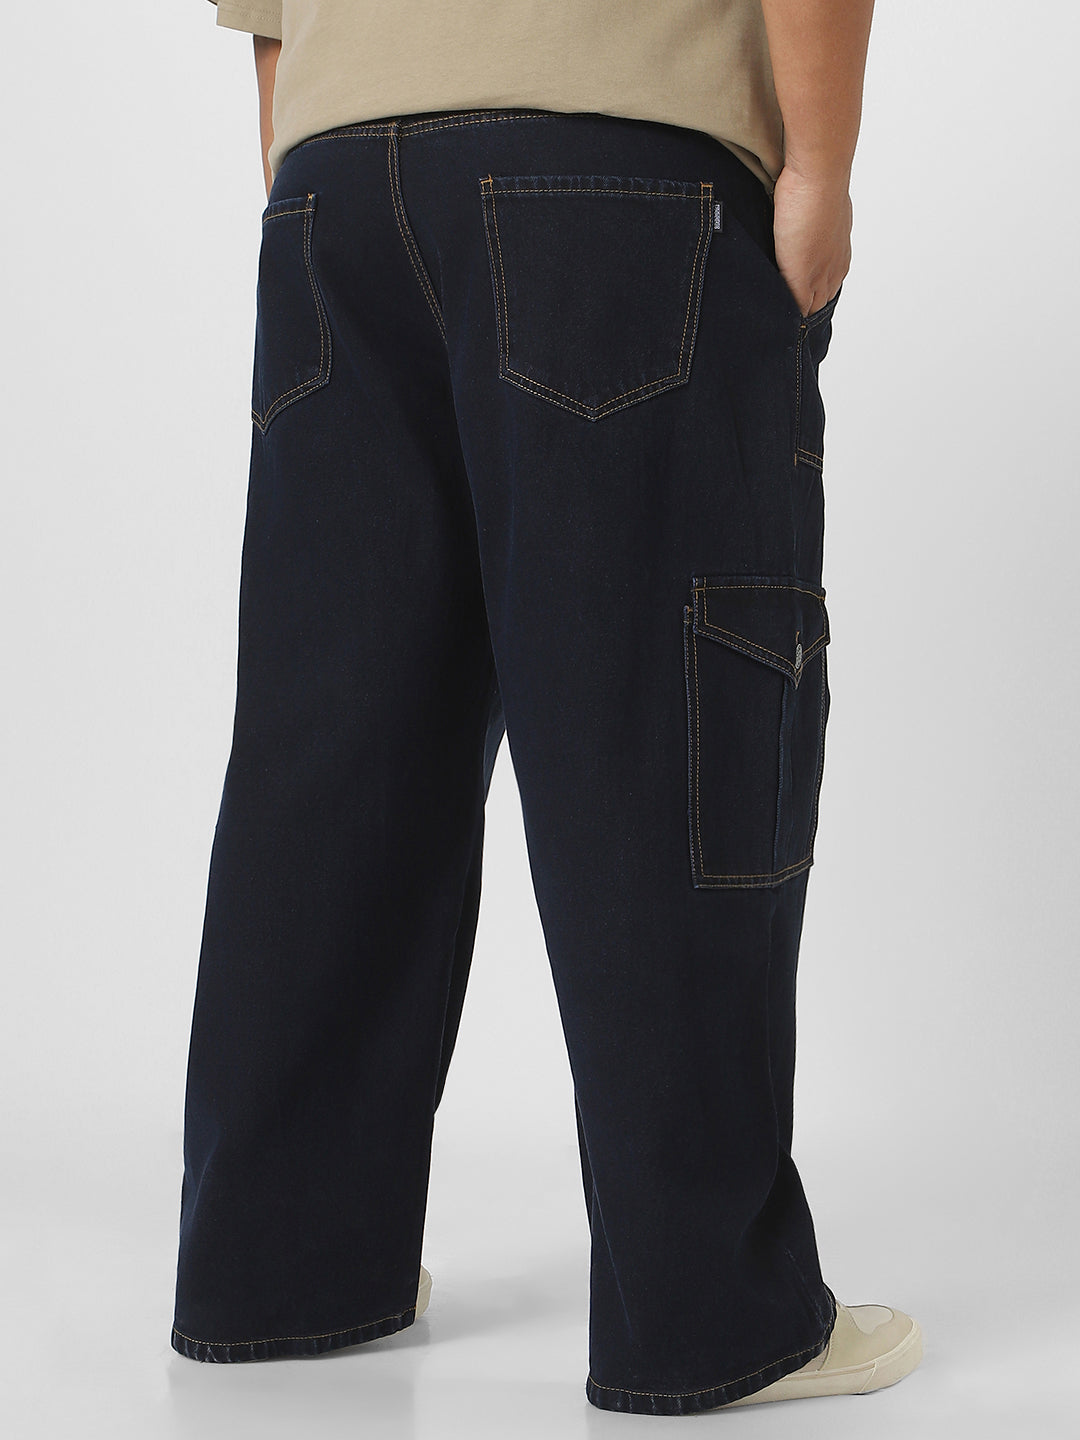 Plus Men's Dark Blue Loose Fit Cargo Jeans with 6 Pockets Non-Stretchable